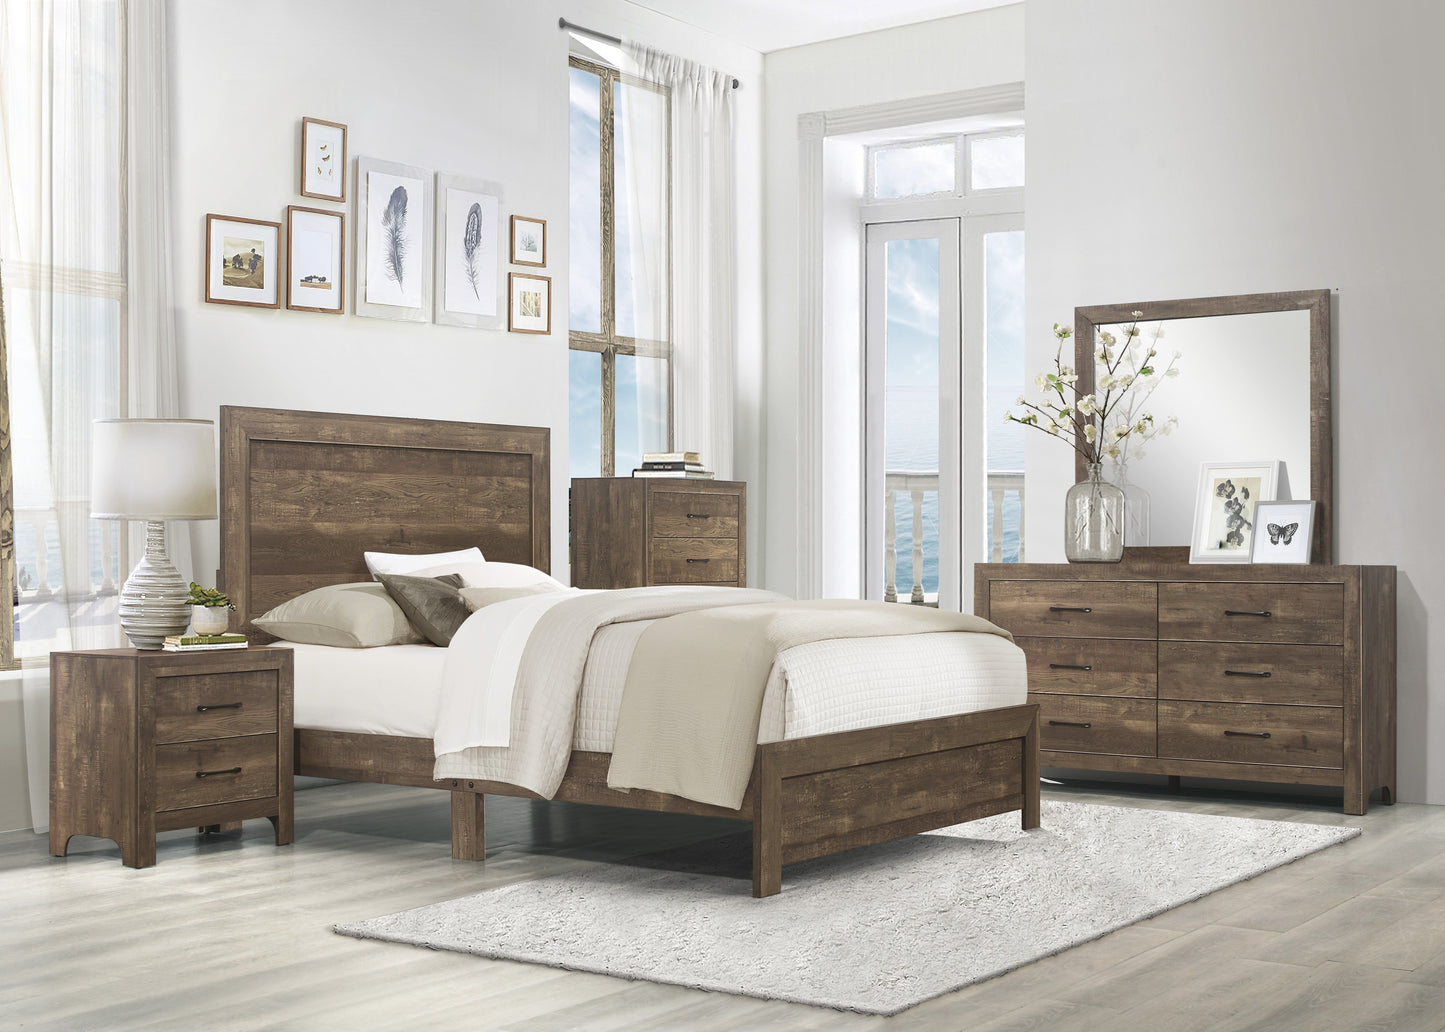 Baker Rustic Style Cal King Bed Frame